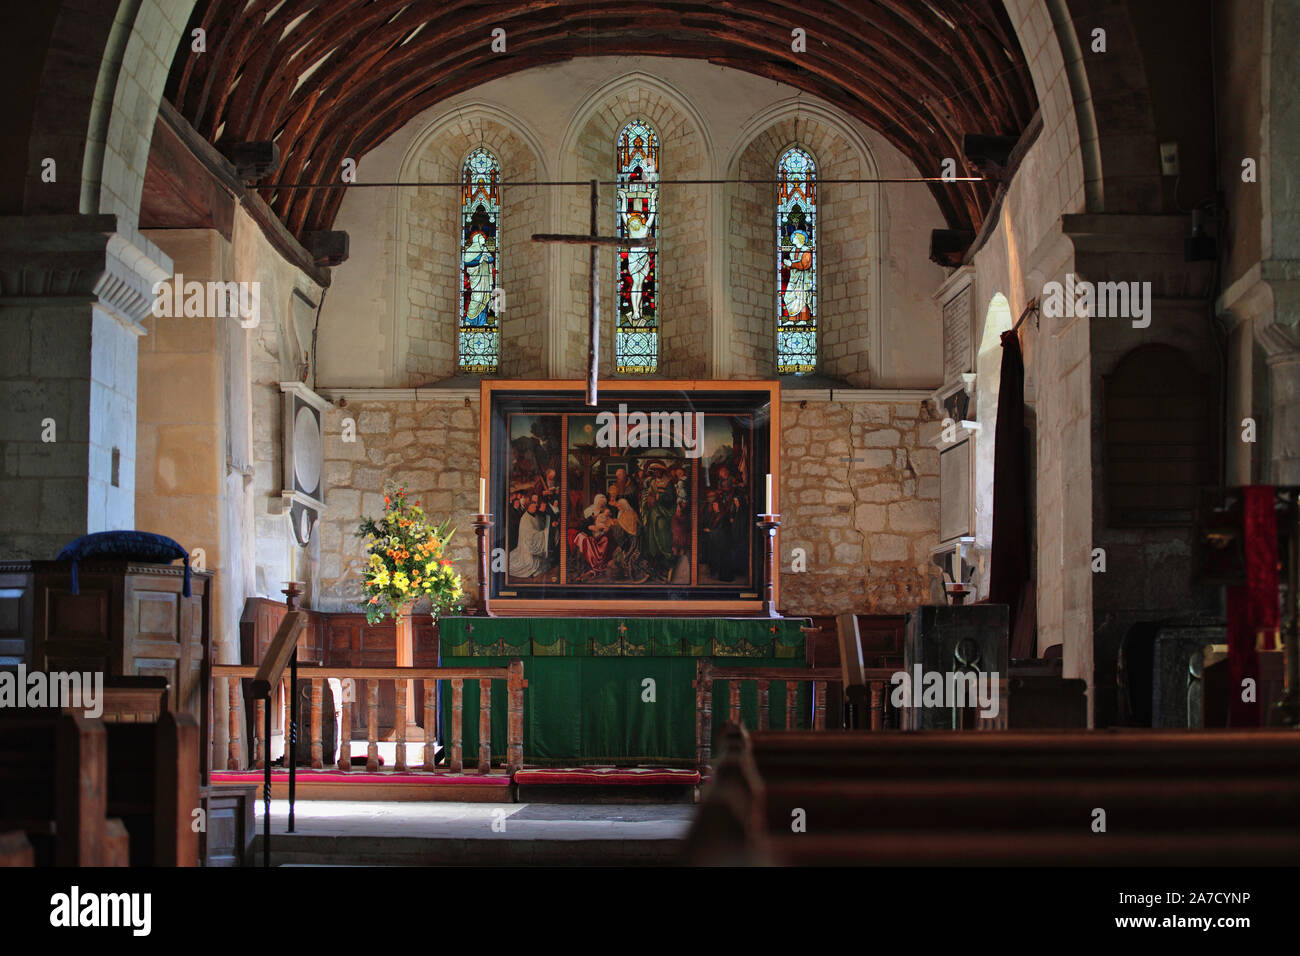 Chancel and altar of St. Mary's Church, Selborne, Hampshire, UK showing a fine triptych painting of the Adoration of the Magi, by Jan Mostaert, 1515 Stock Photo